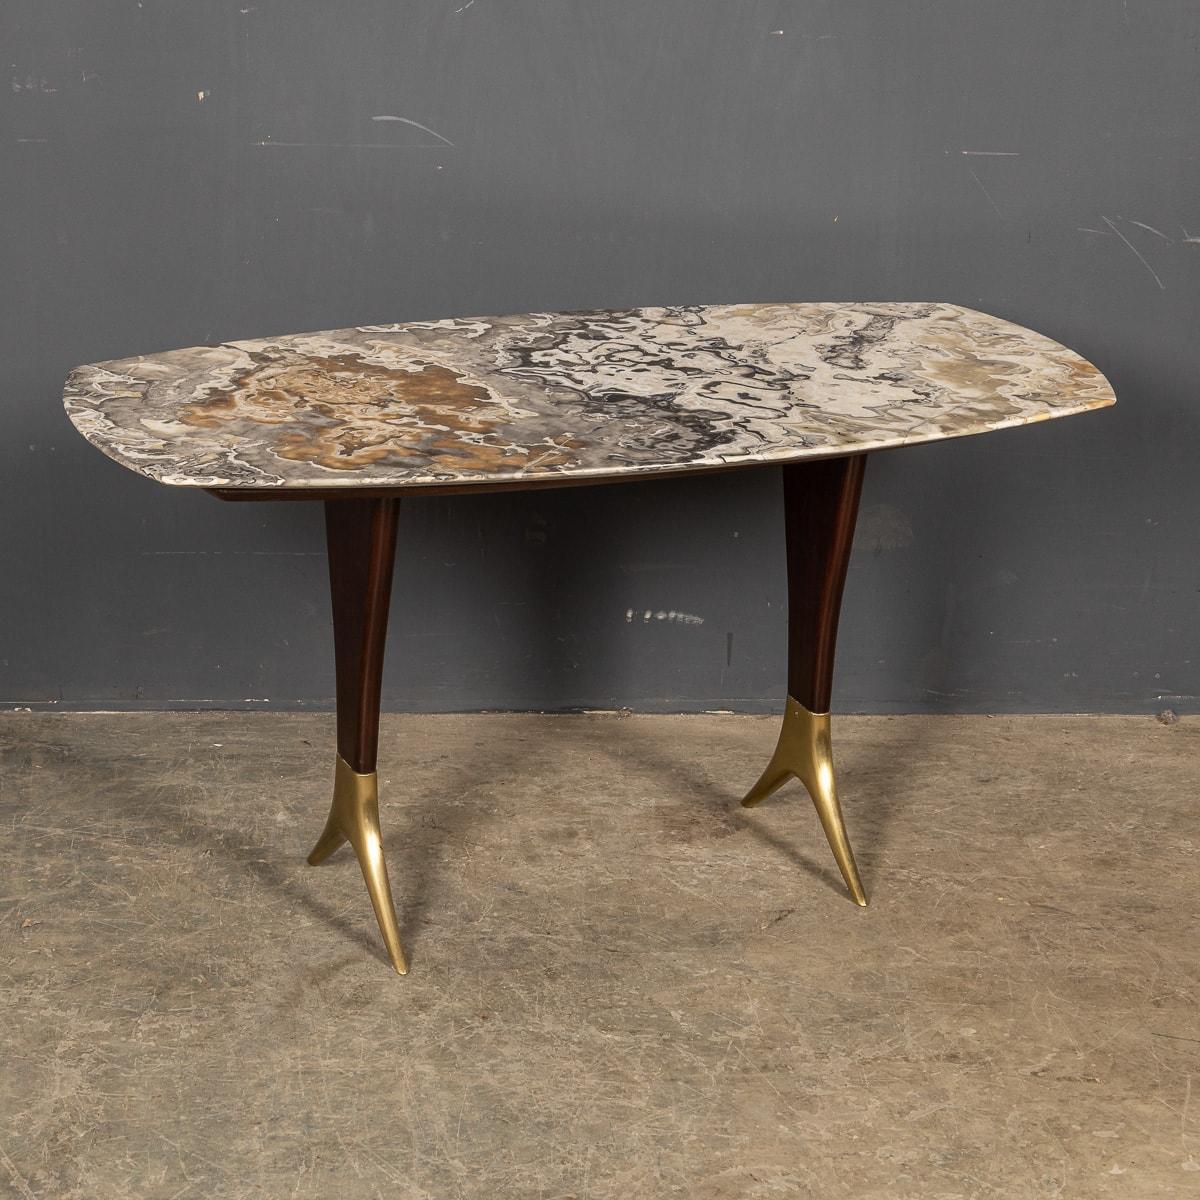 Mid 20th Century Italian marble topped coffee table with ebonised wooden legs capped in brass.

CONDITION
In Great Condition - wear consistent with age.

SIZE
Height: 51cm
Width: 100cm
Depth: 50cm